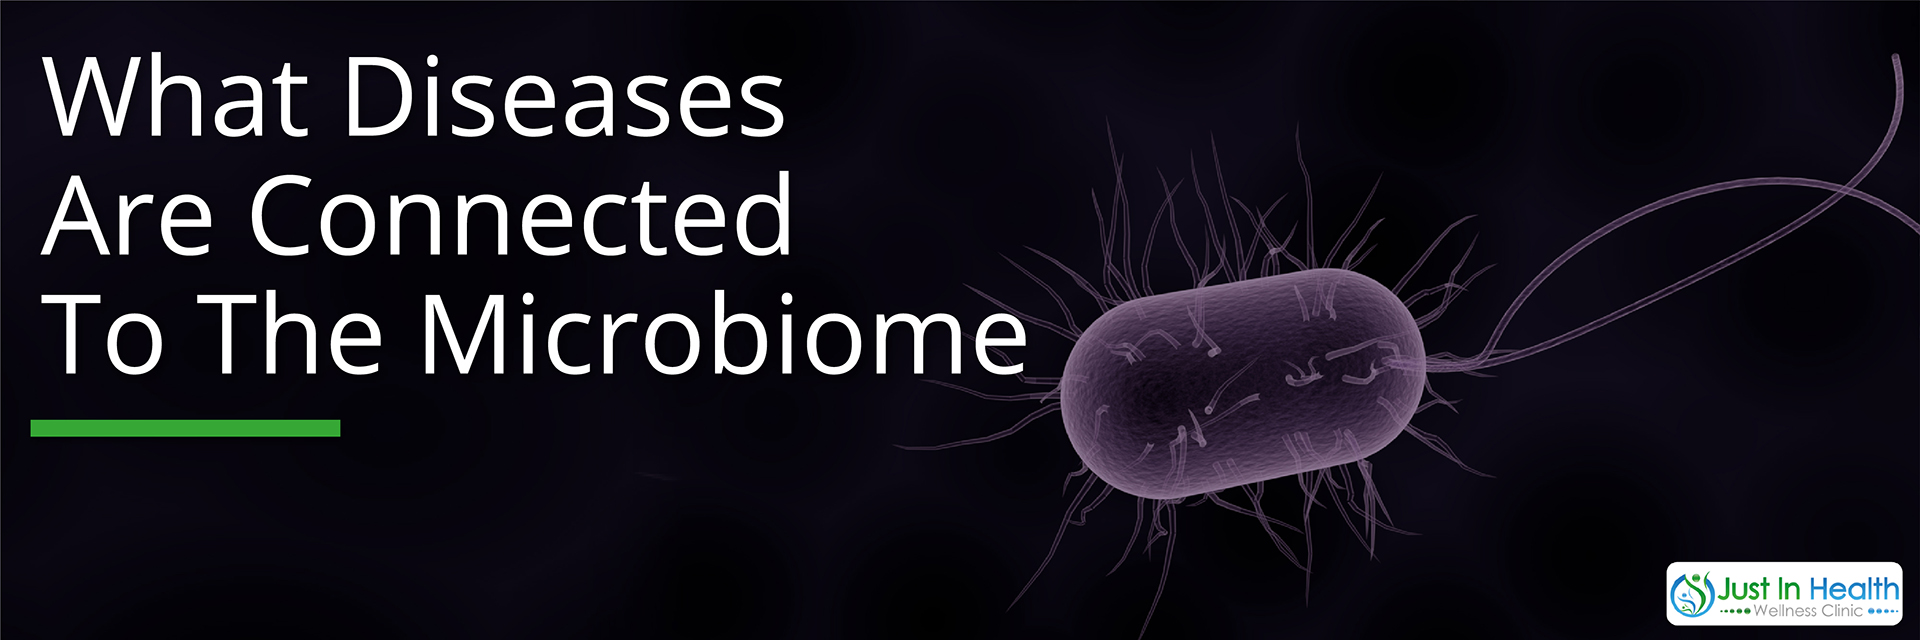 What Diseases are connected to microbiome